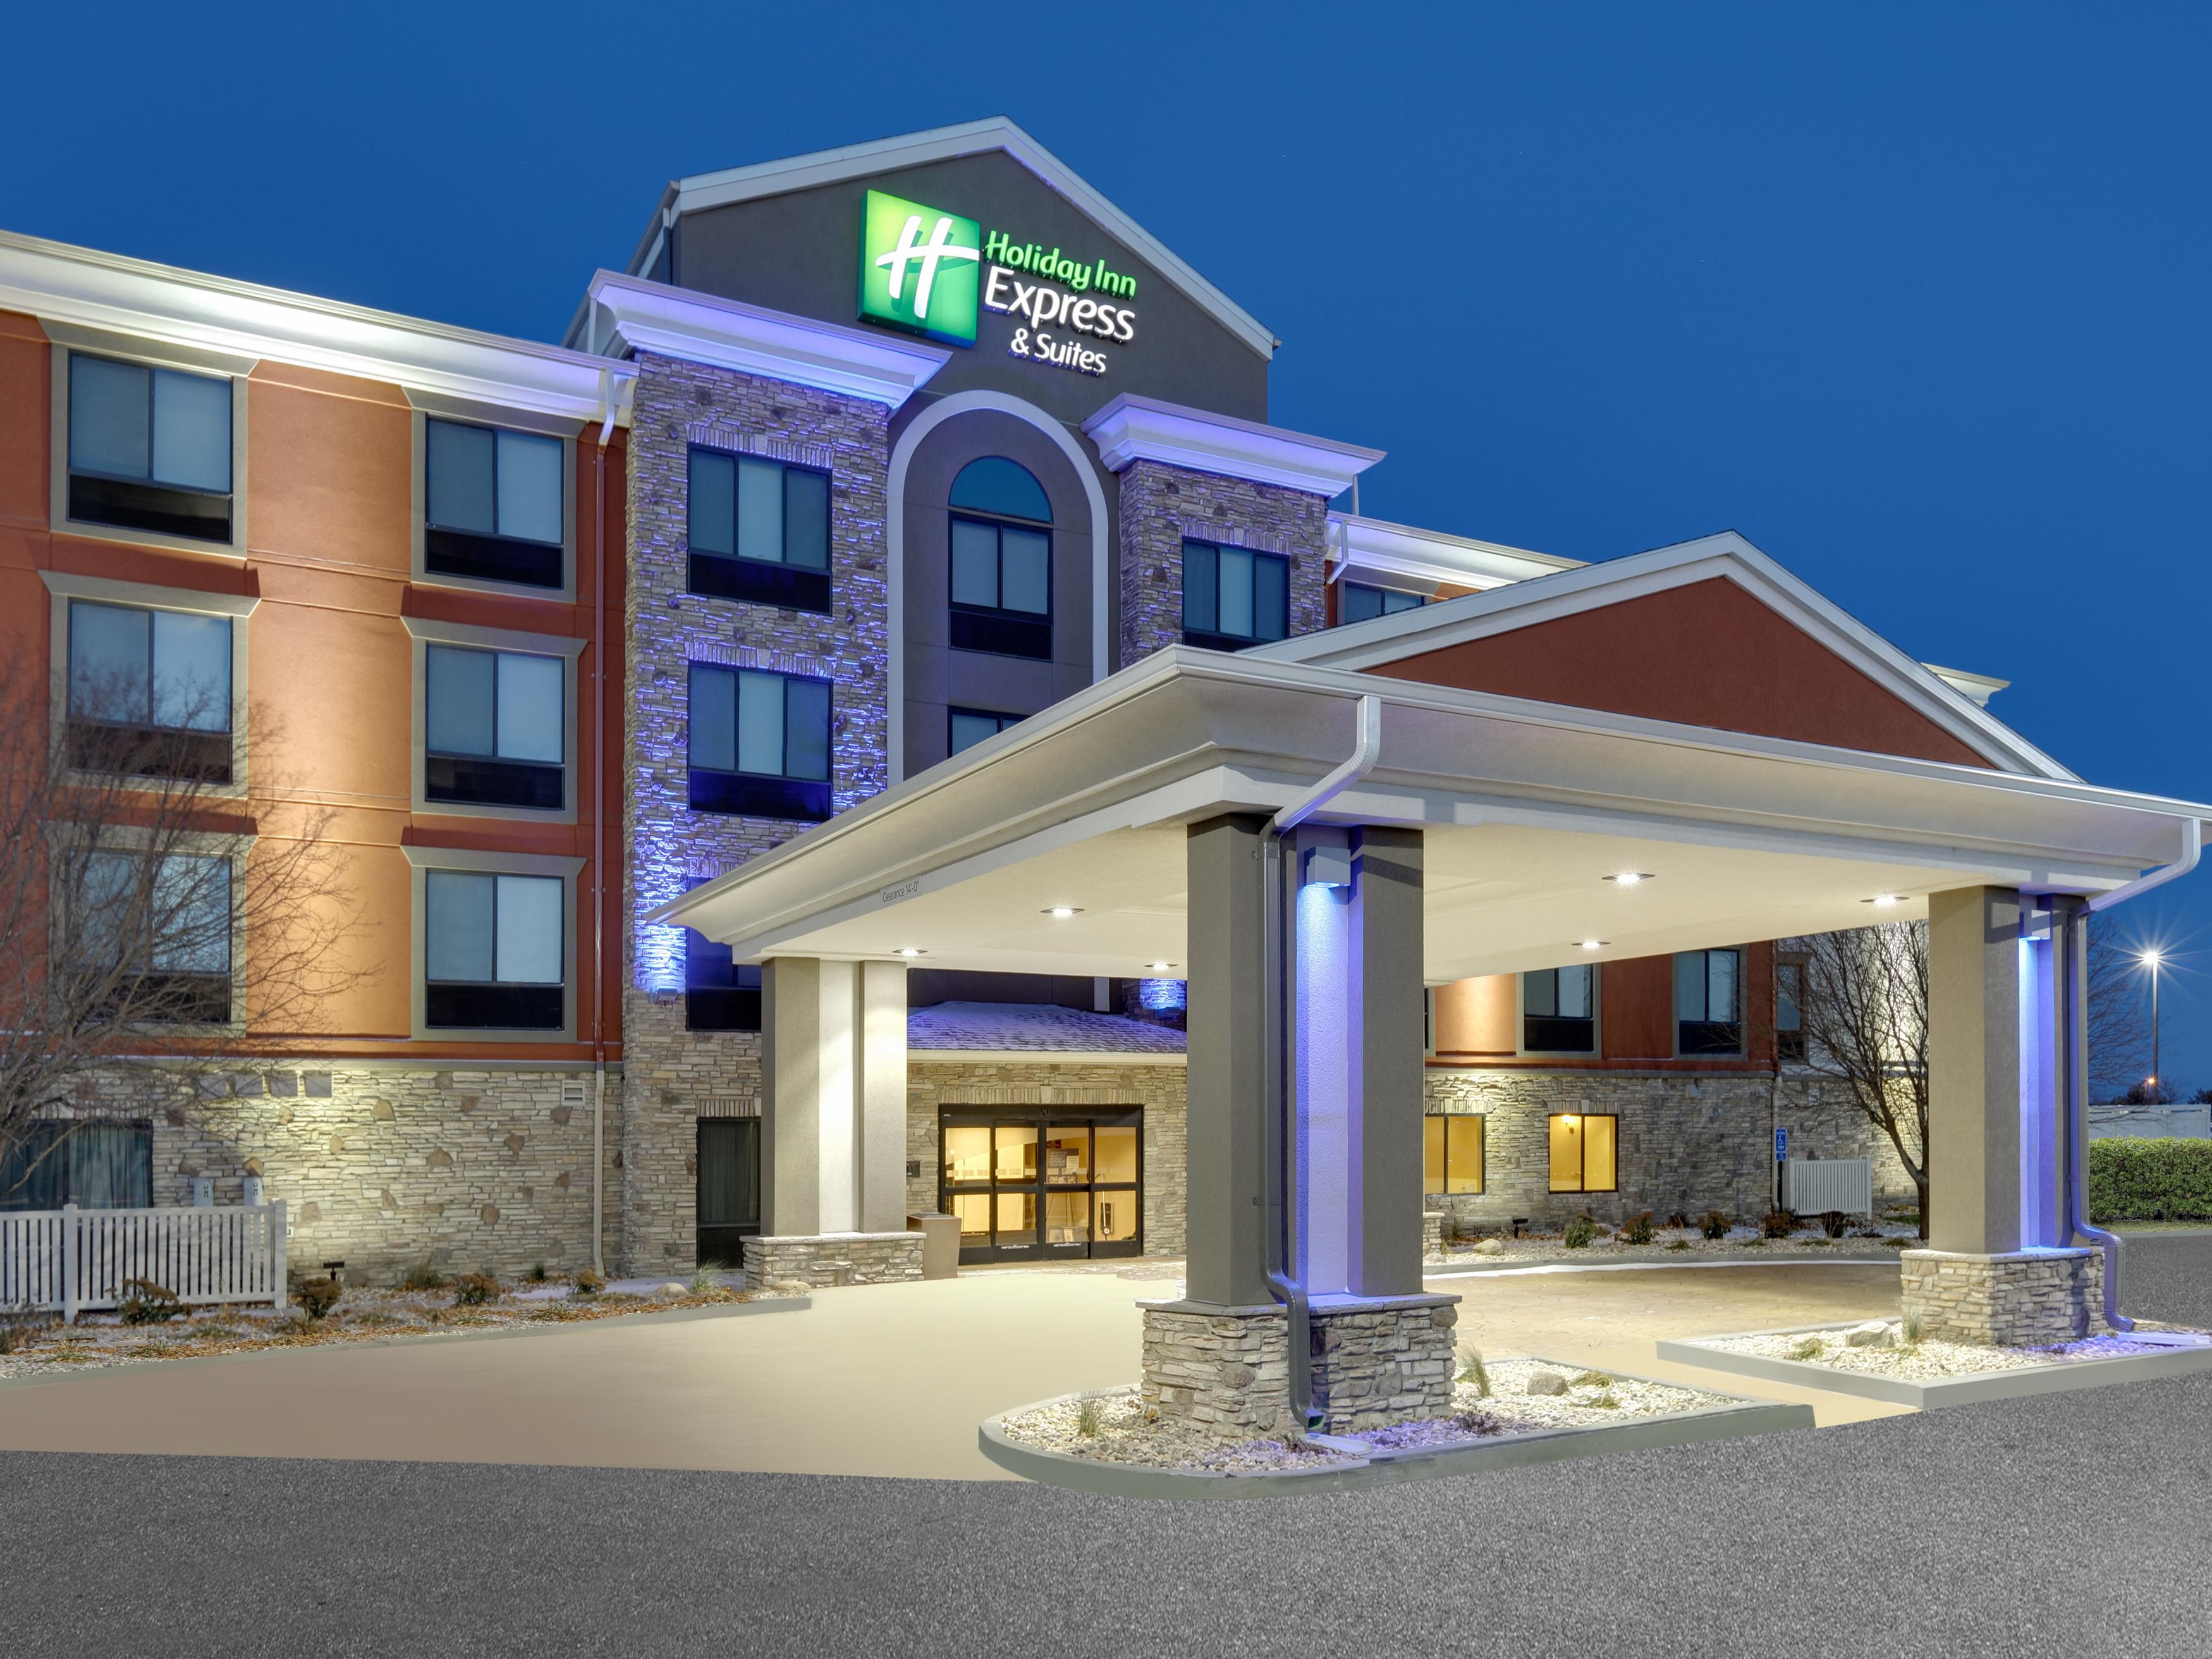 Holiday Inn Express And Suites Mitchell 6240540212 4x3